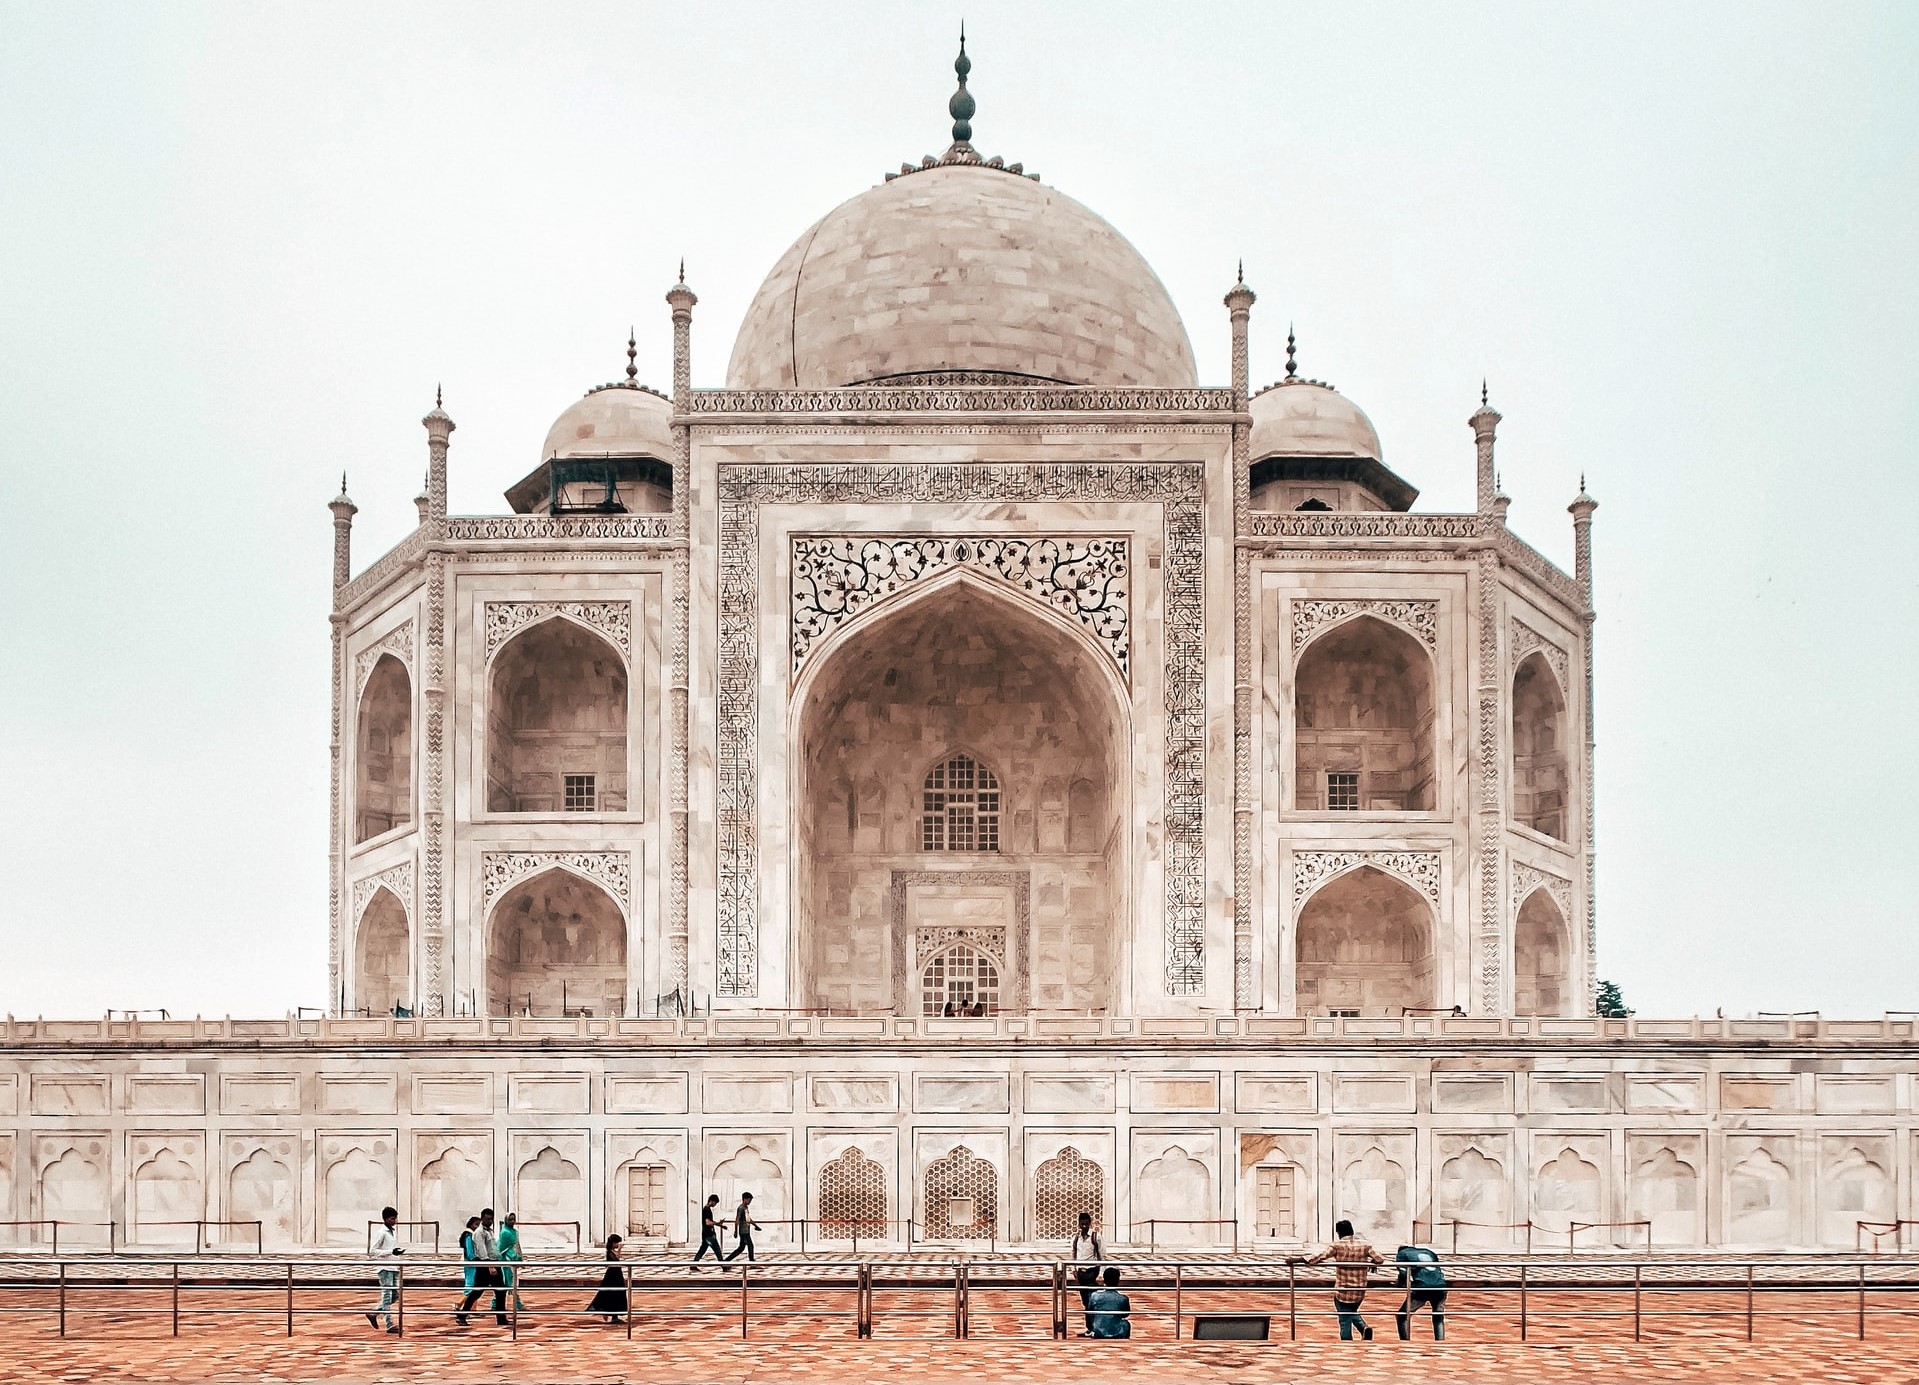 Image of the Taj Mahal in India. The Global Emerging Markets team recently visisted India on a research trip and explain why it tops their Sovereign assessment